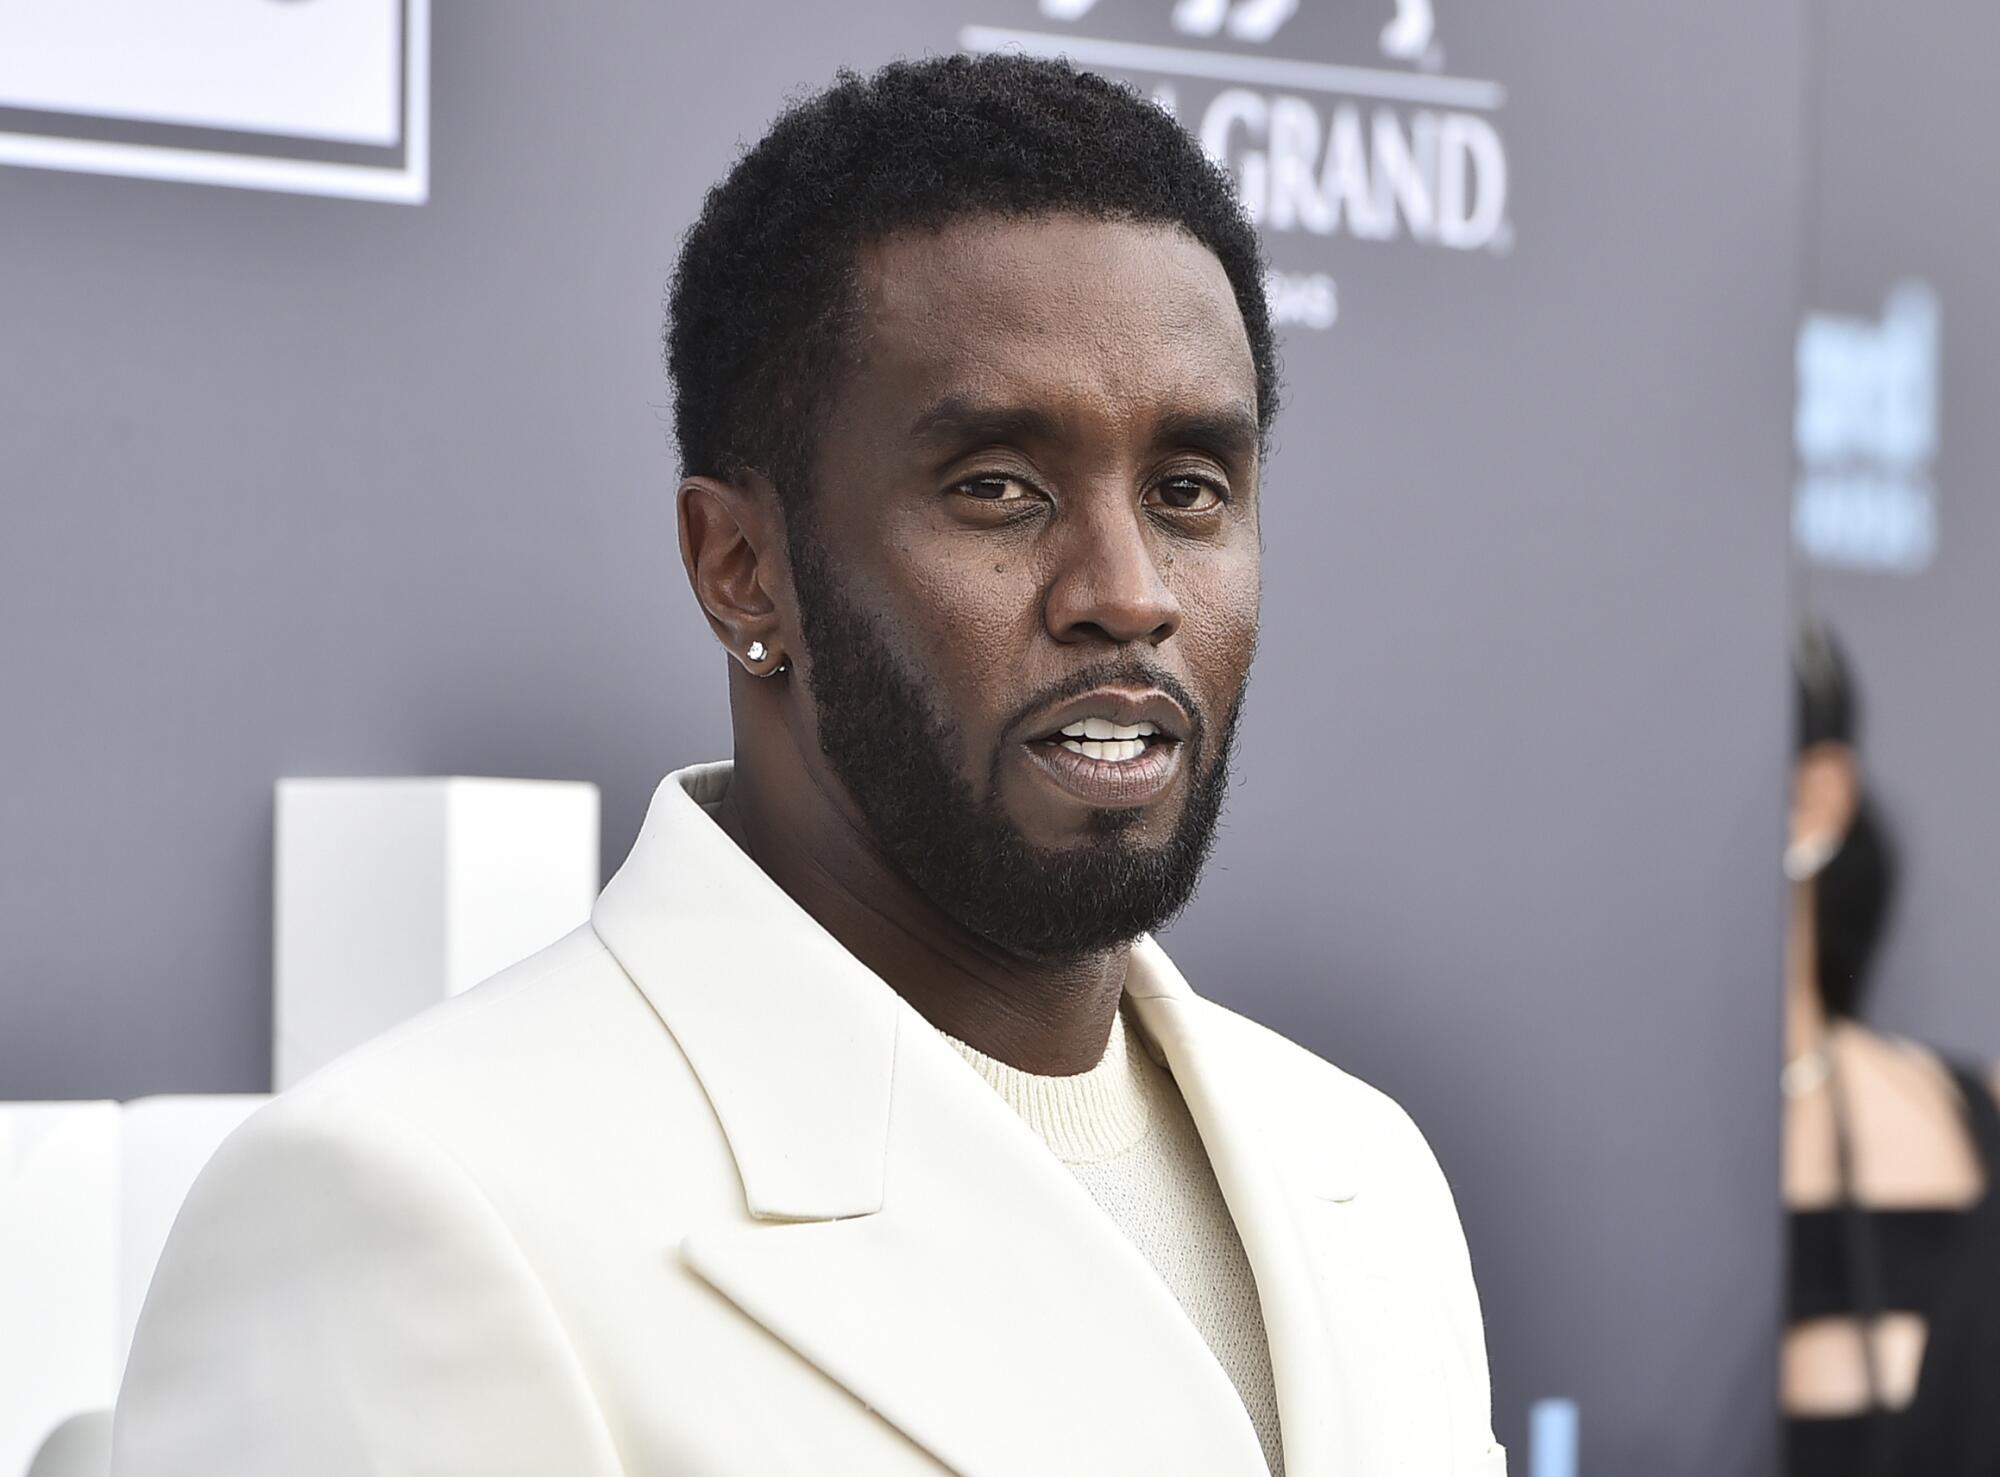 Sean "Diddy" Combs, dressed in a white shirt and blazer, looking serious